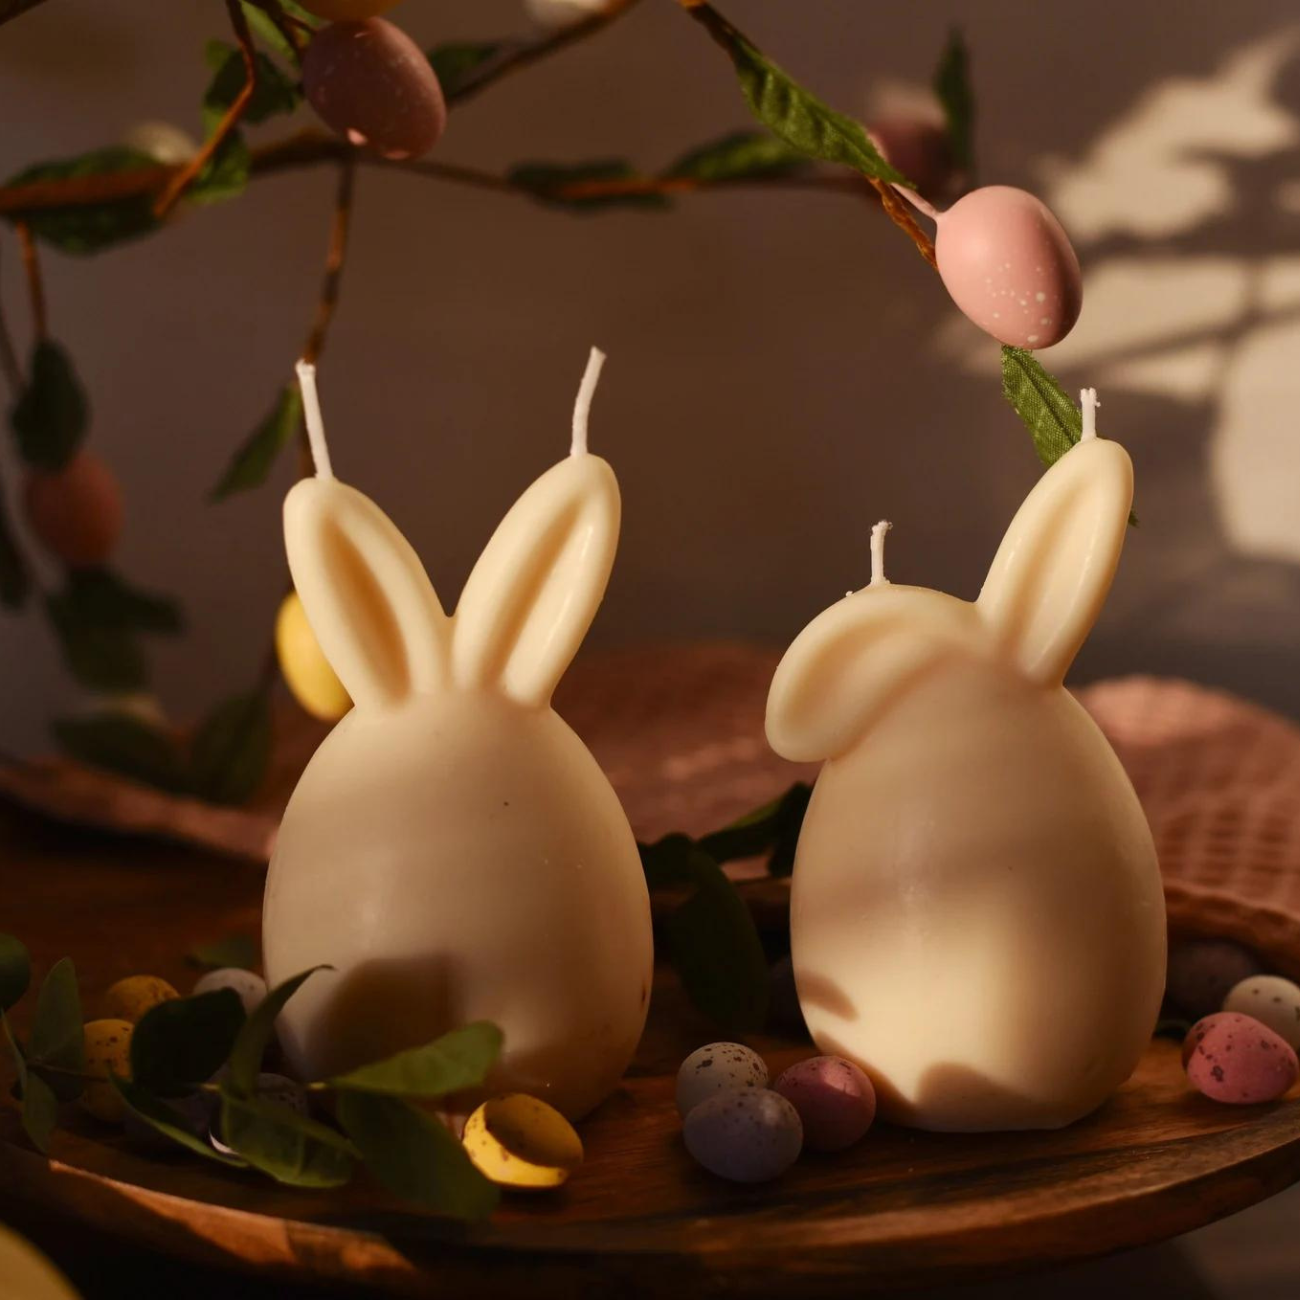 cute modern easter decorations